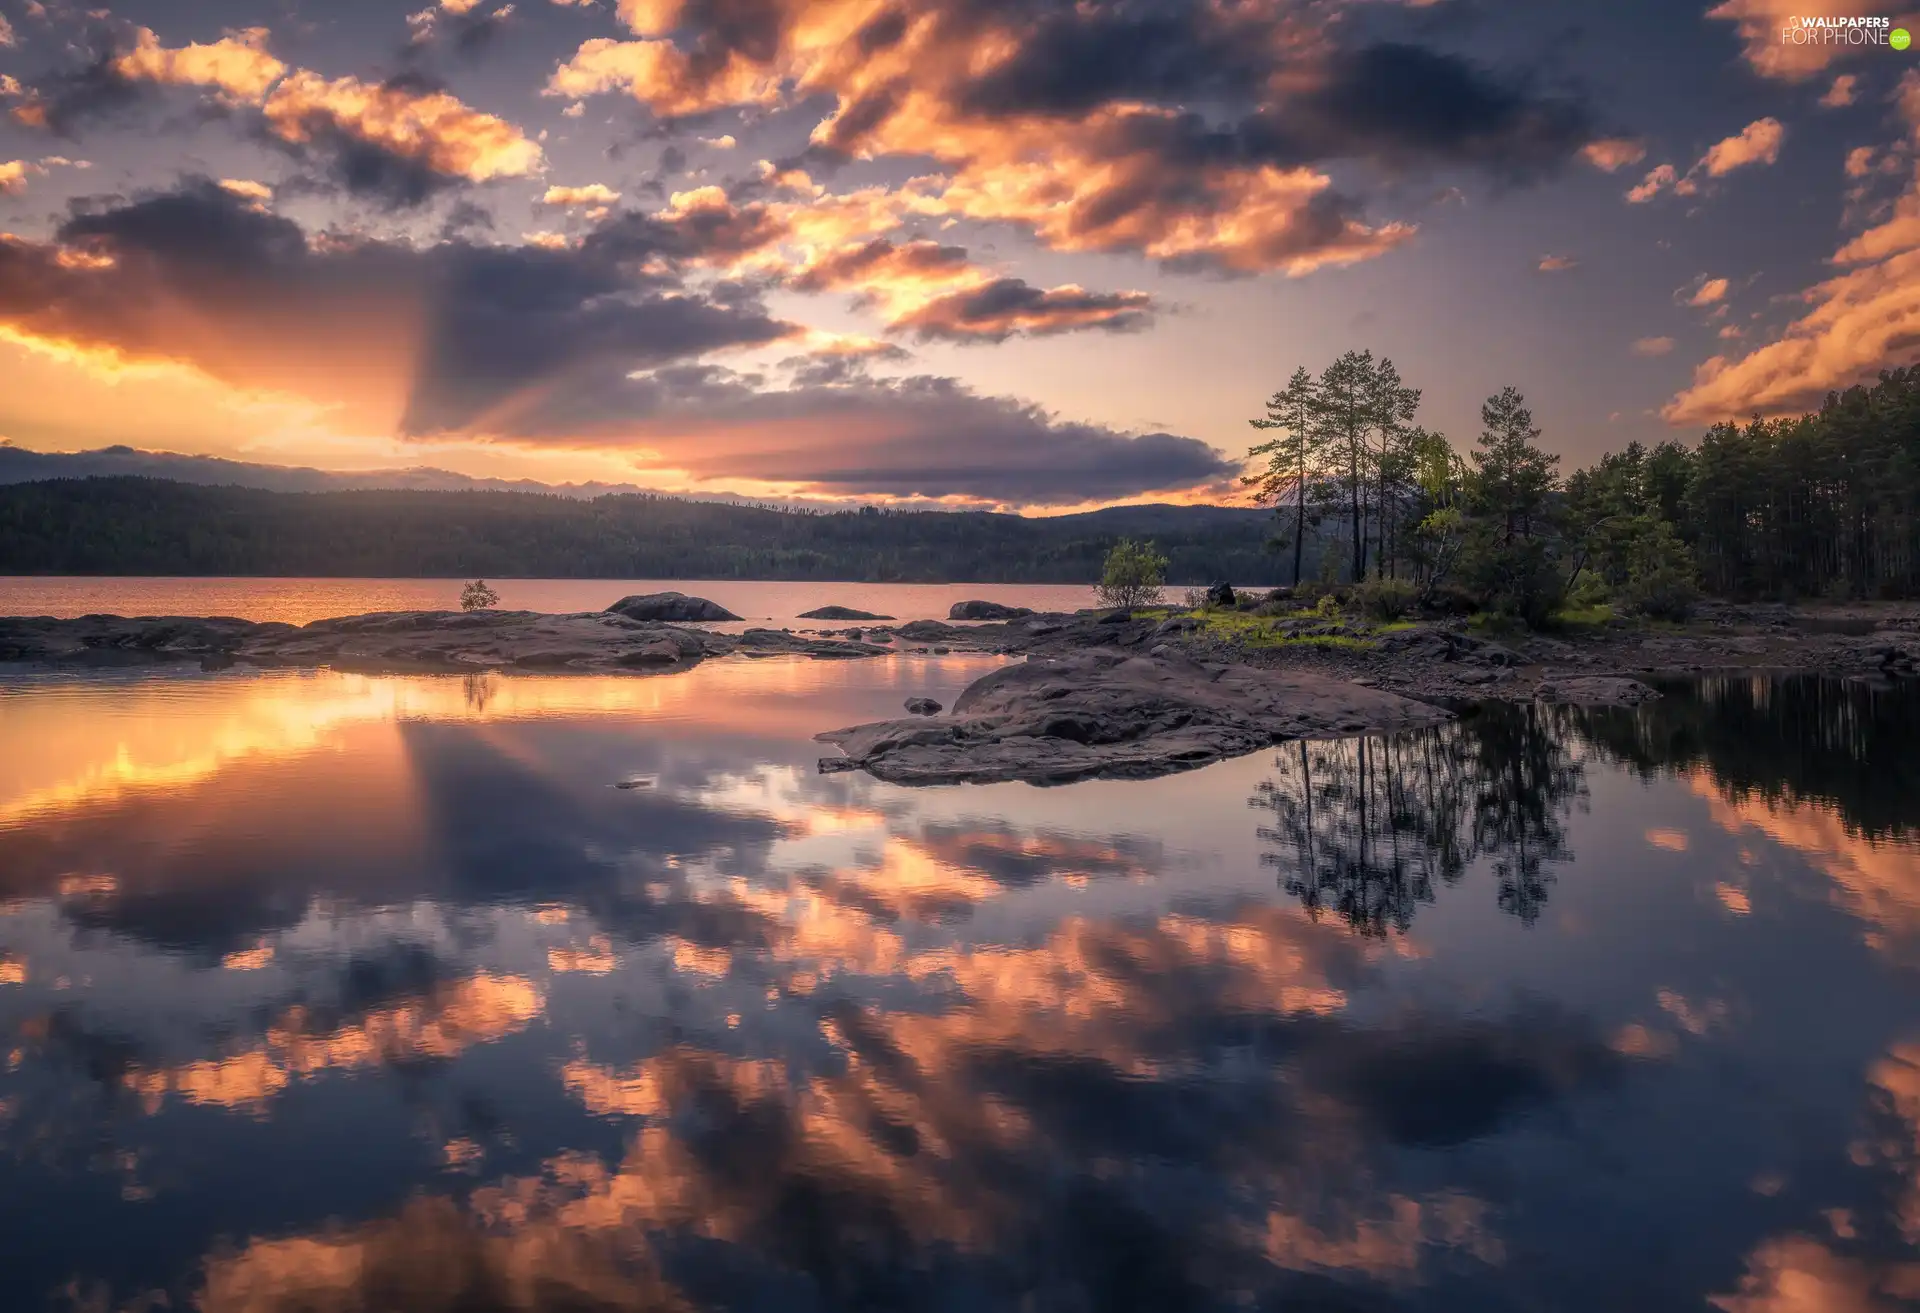 Great Sunsets, lake, viewes, rocks, trees, clouds